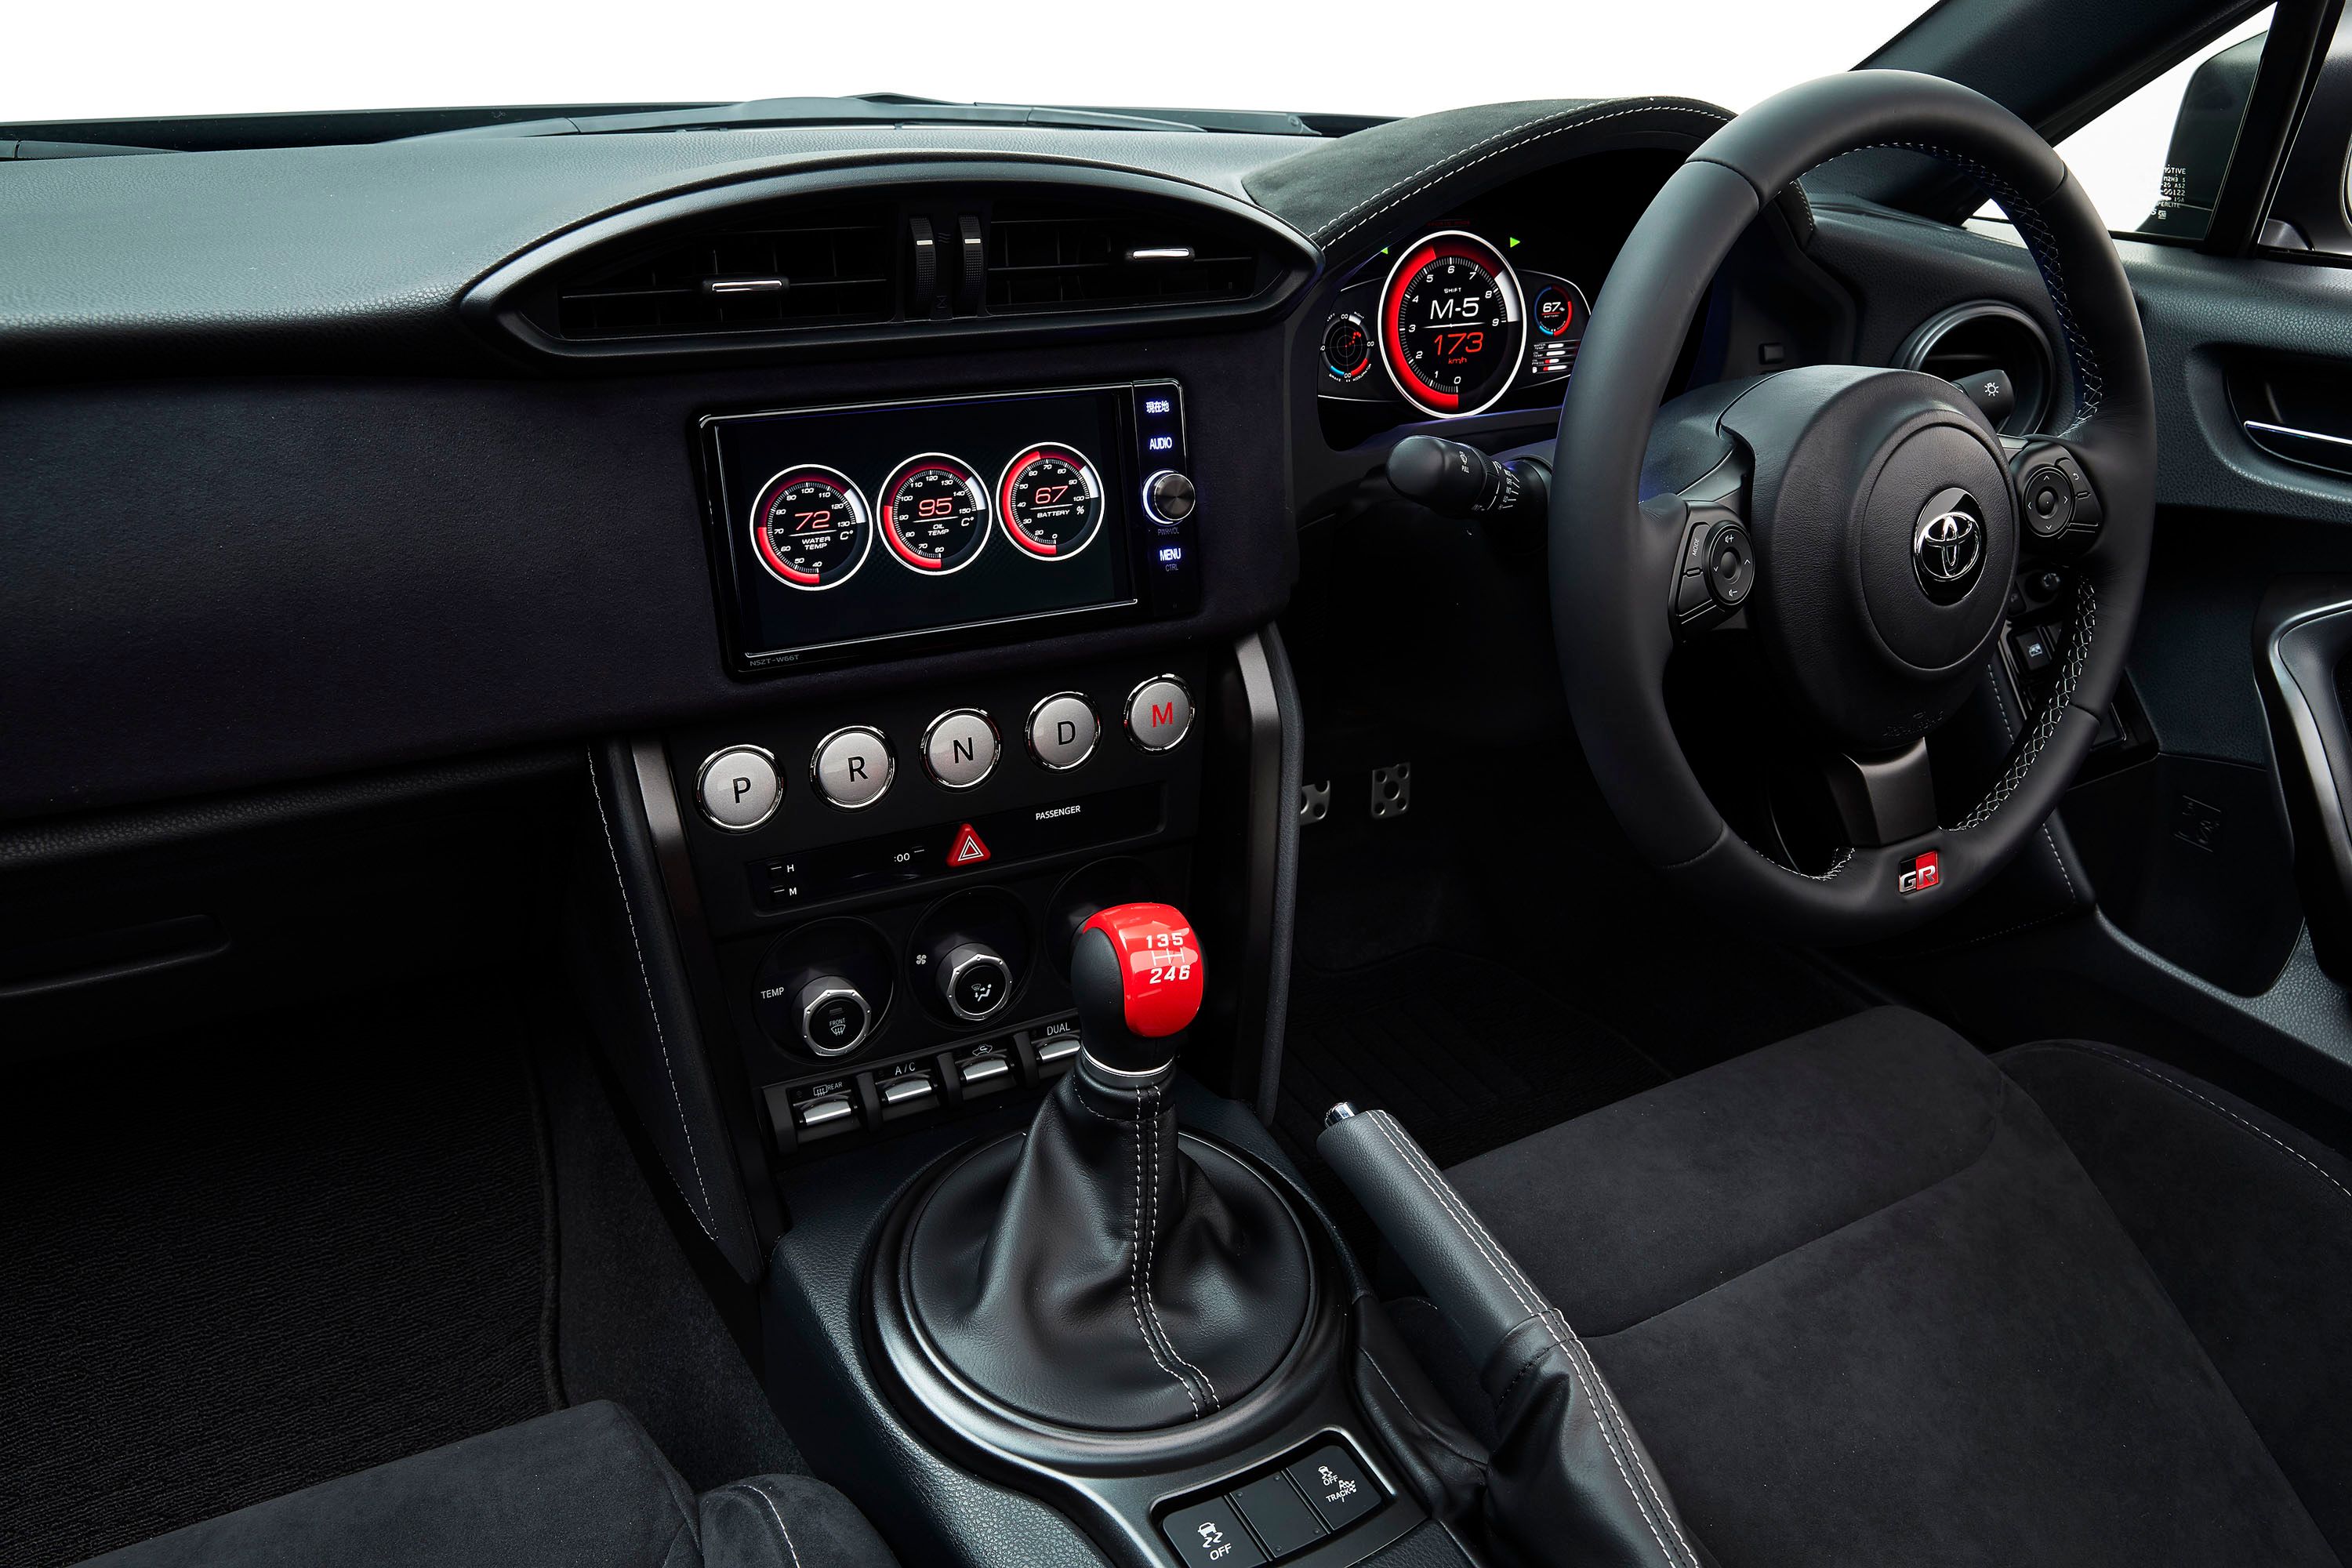 GT86 platform obvious in the interior